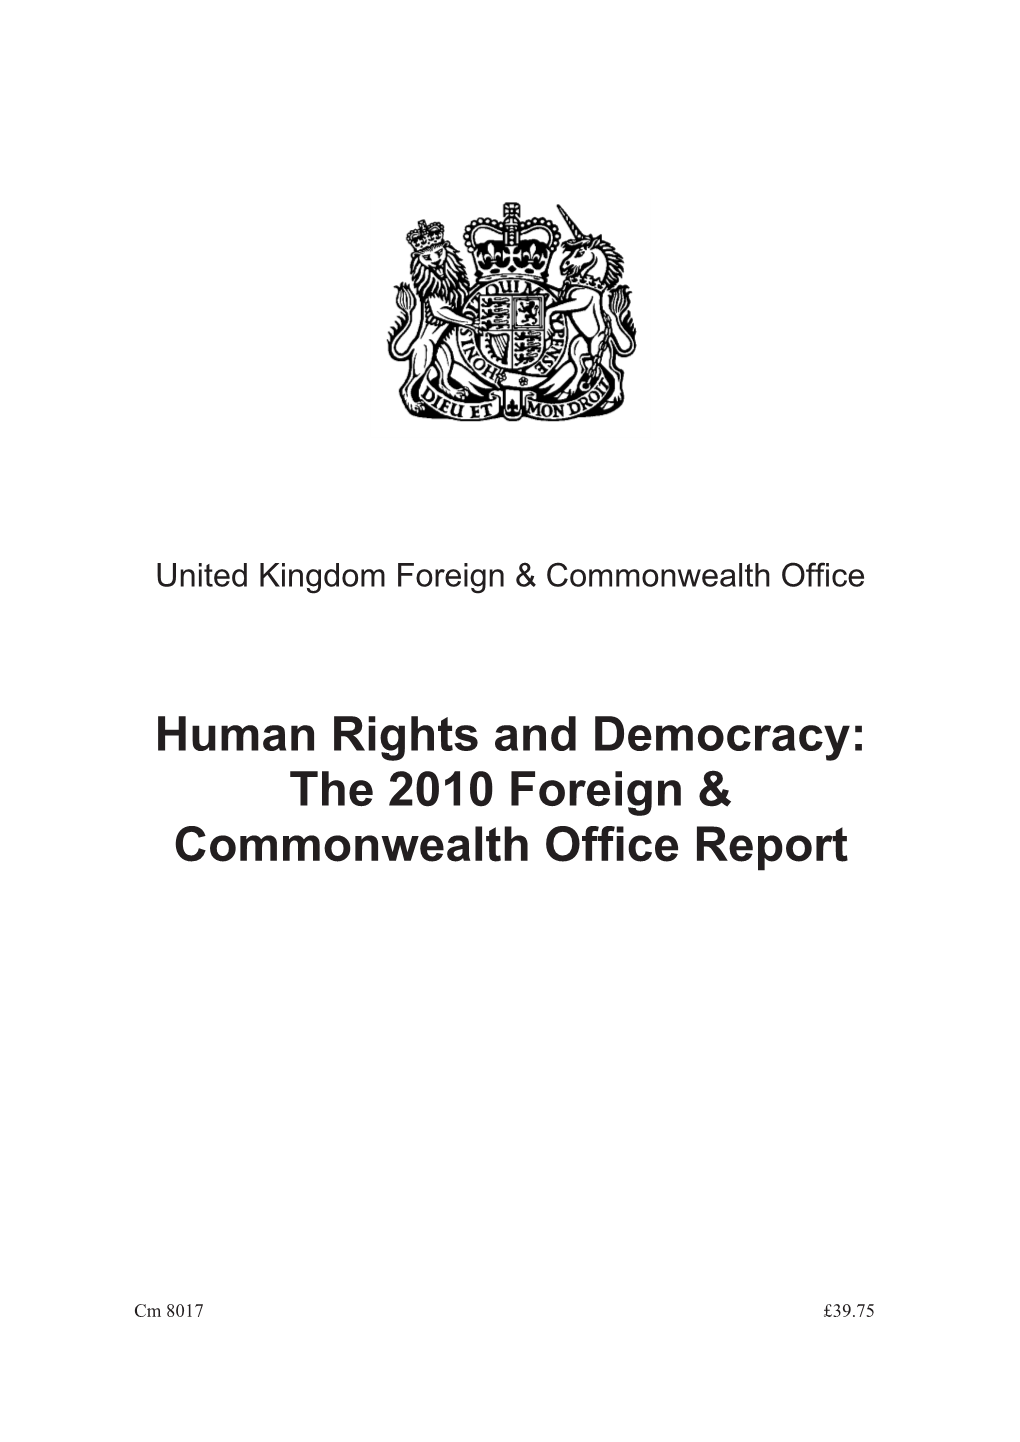 CM8017 Human Rights and Democracy